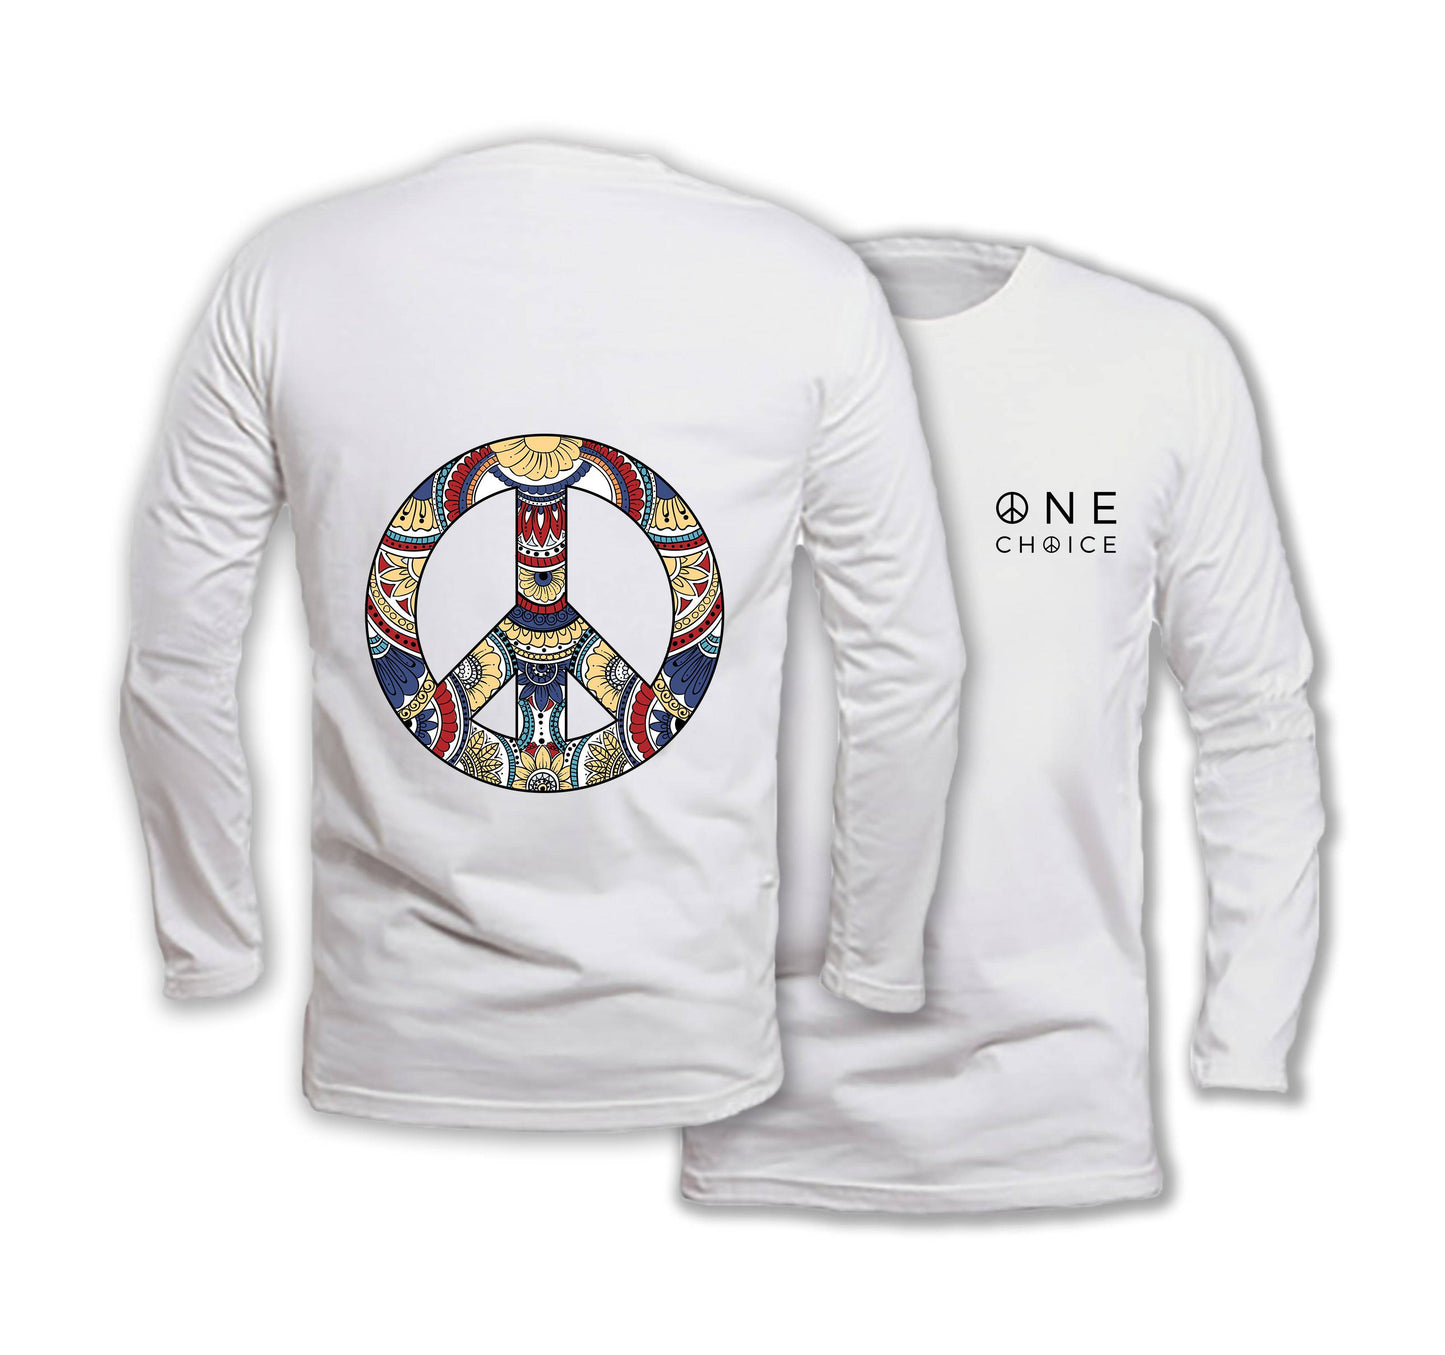 Patterned Peace - Long Sleeve Organic Cotton T-Shirt - One Choice Apparel